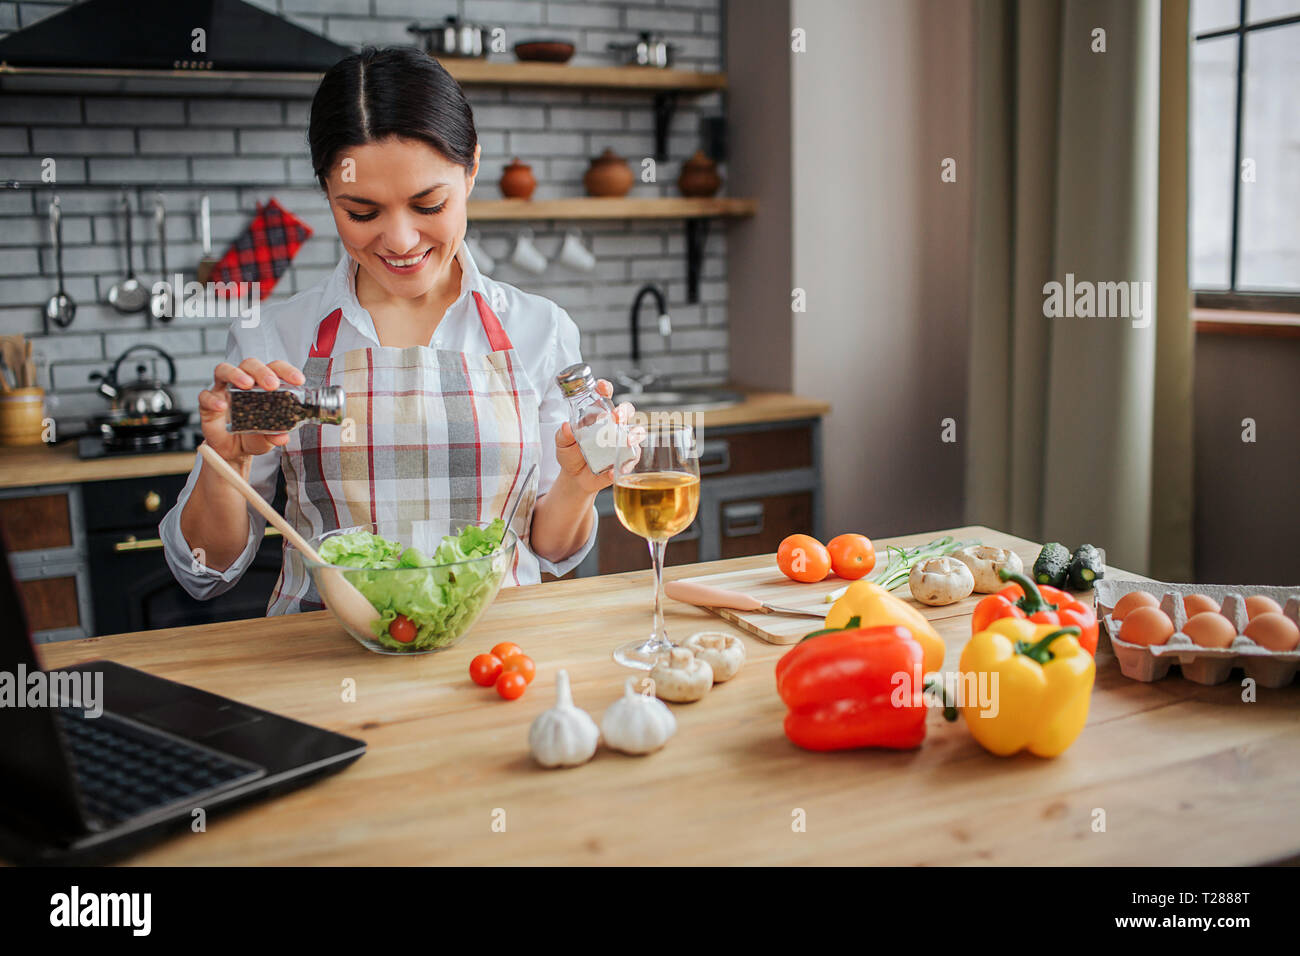 Cheerful nice woman sit at table in kitchen and put spices in bowl with salad. She looks happy. Woman wears apron. Colorful vegetables and eggs stand  Stock Photo